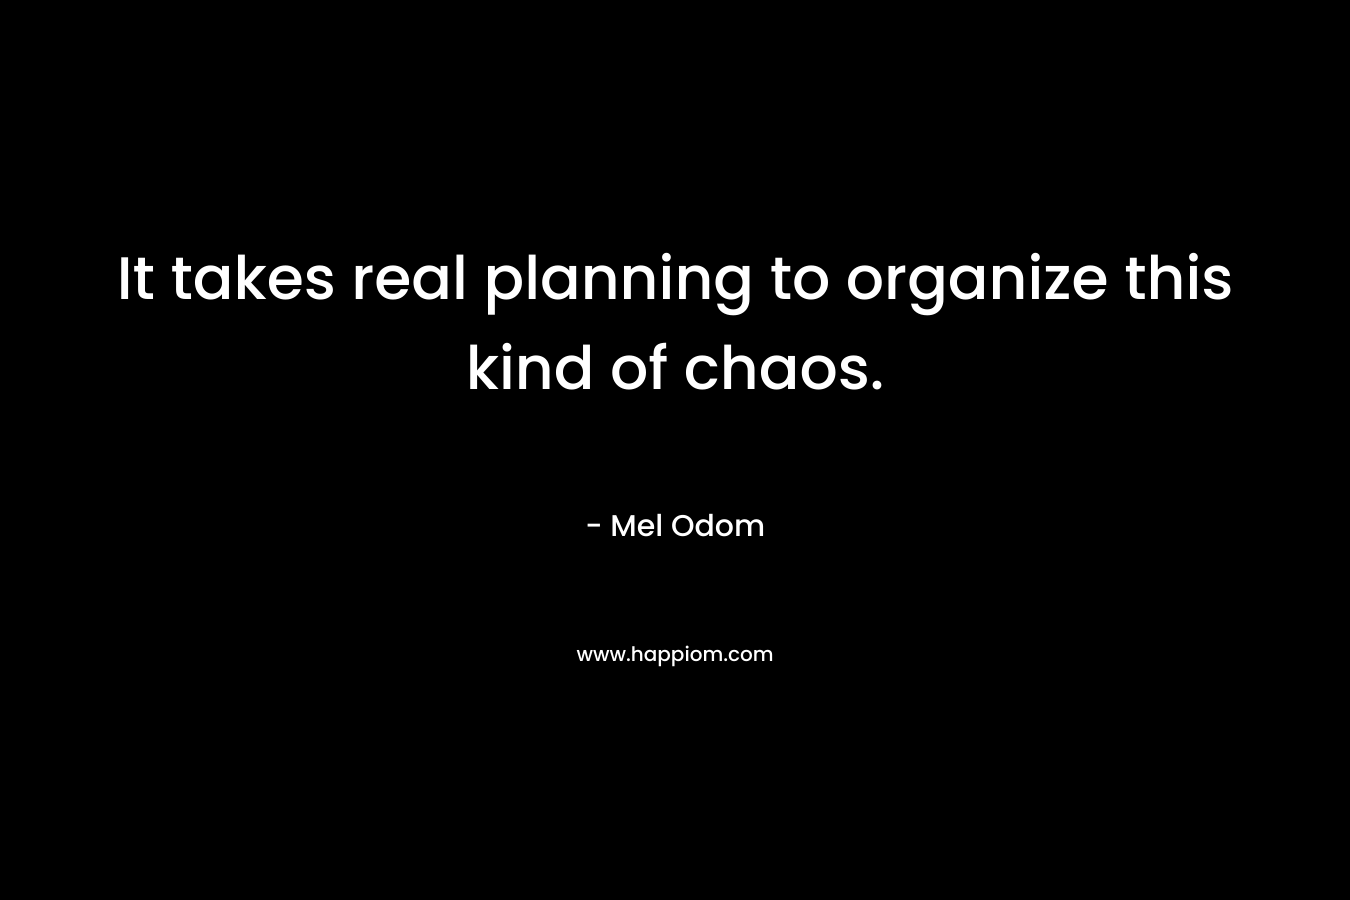 It takes real planning to organize this kind of chaos.